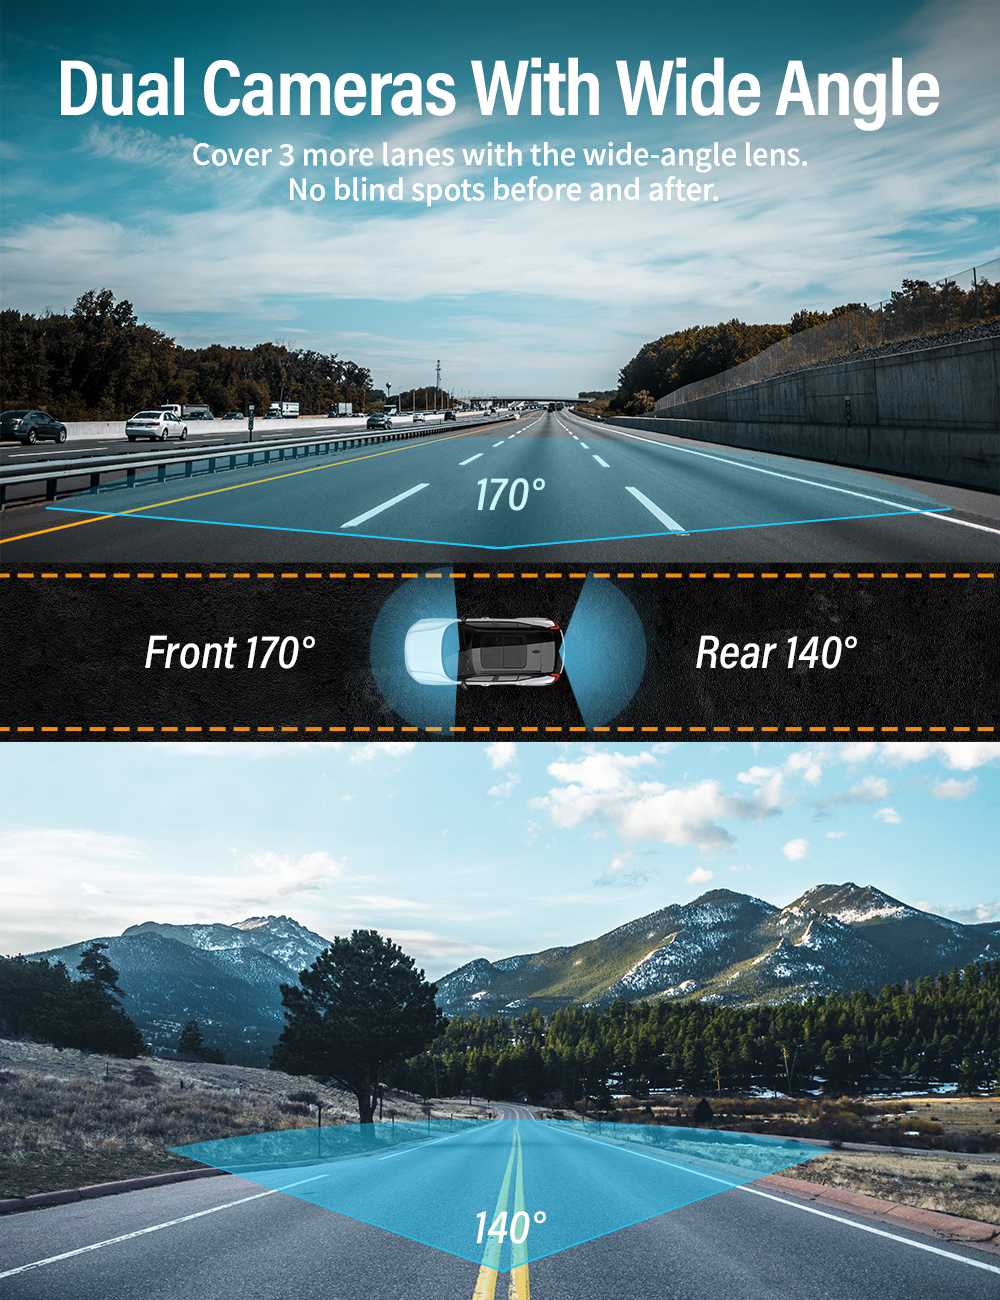 Dash Cam Front and Rear Camera FHD 1080P with Night Vision SD Card Included, 3 Inch IPS Screen Dash Cam for Car, 170° Wide Angle Dashboard Camera Motion Detection Parking Monitor G-Sensor